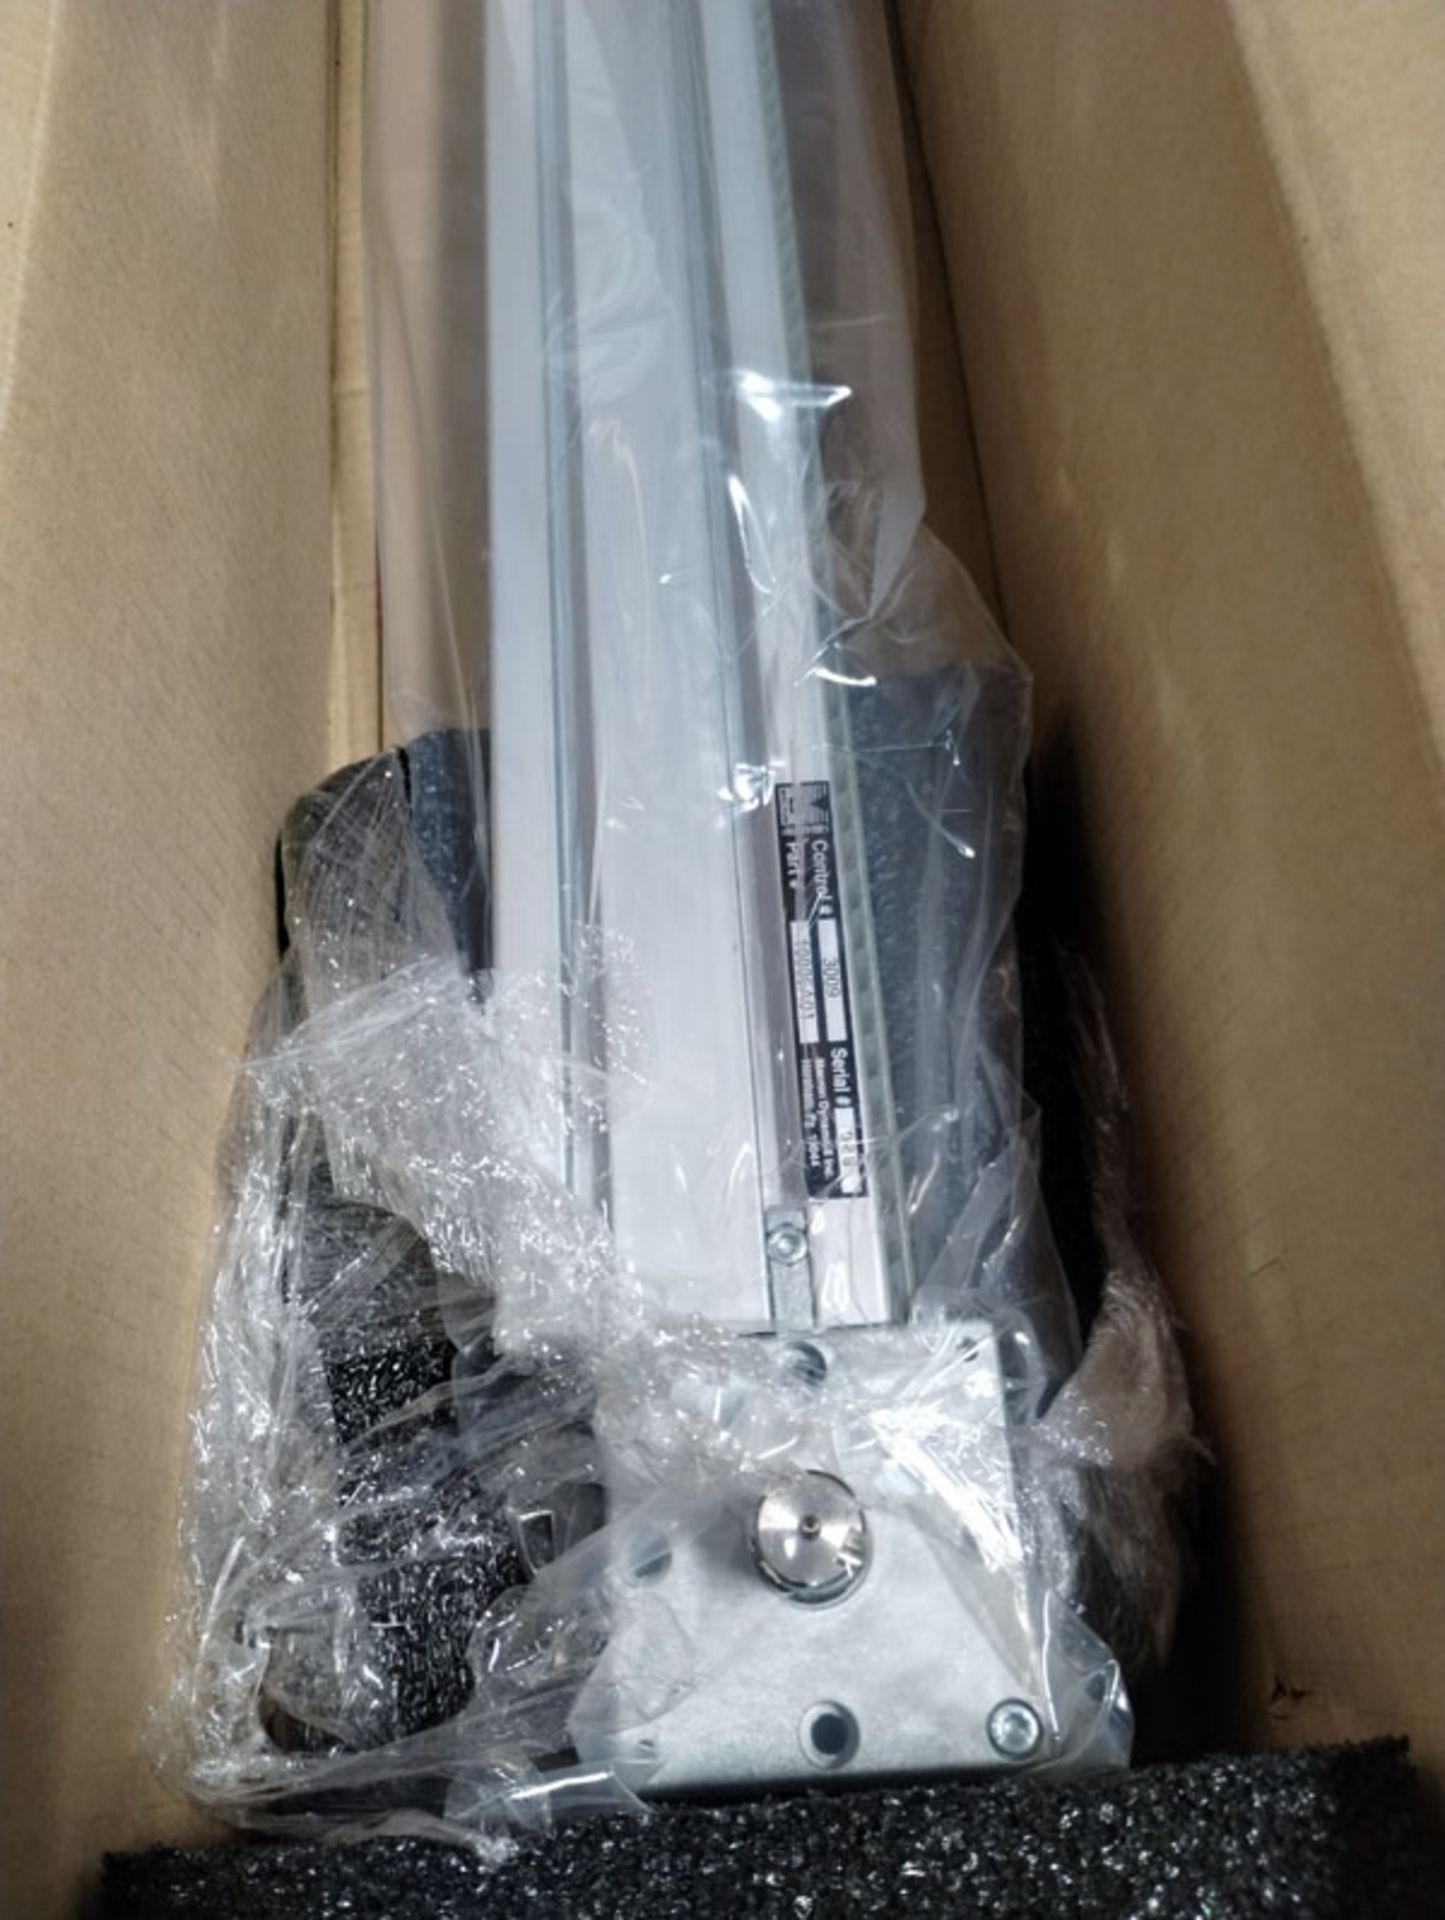 88" LINEAR ACTUATOR PART# 10935A01 -- Lot located at second location: 6800 Union ave. , Cleveland OH - Image 2 of 11